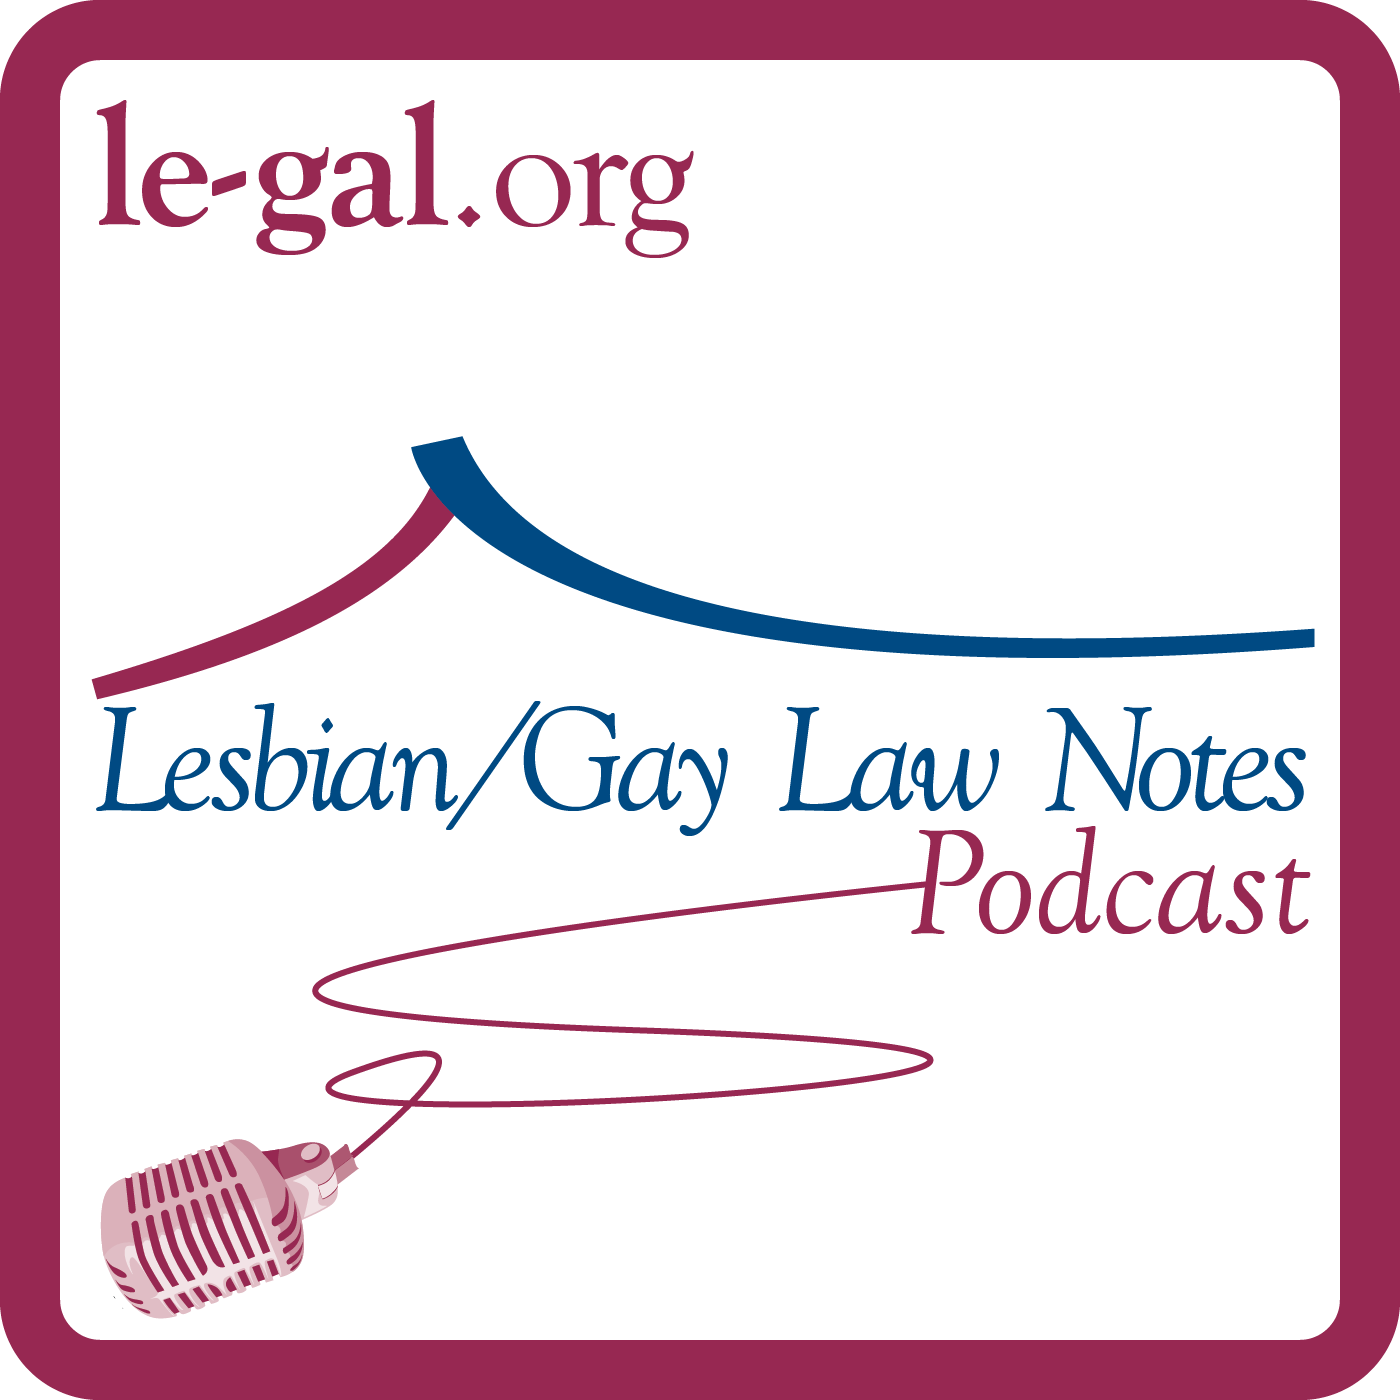  Lesbian/Gay Law Notes Podcast: October 2013